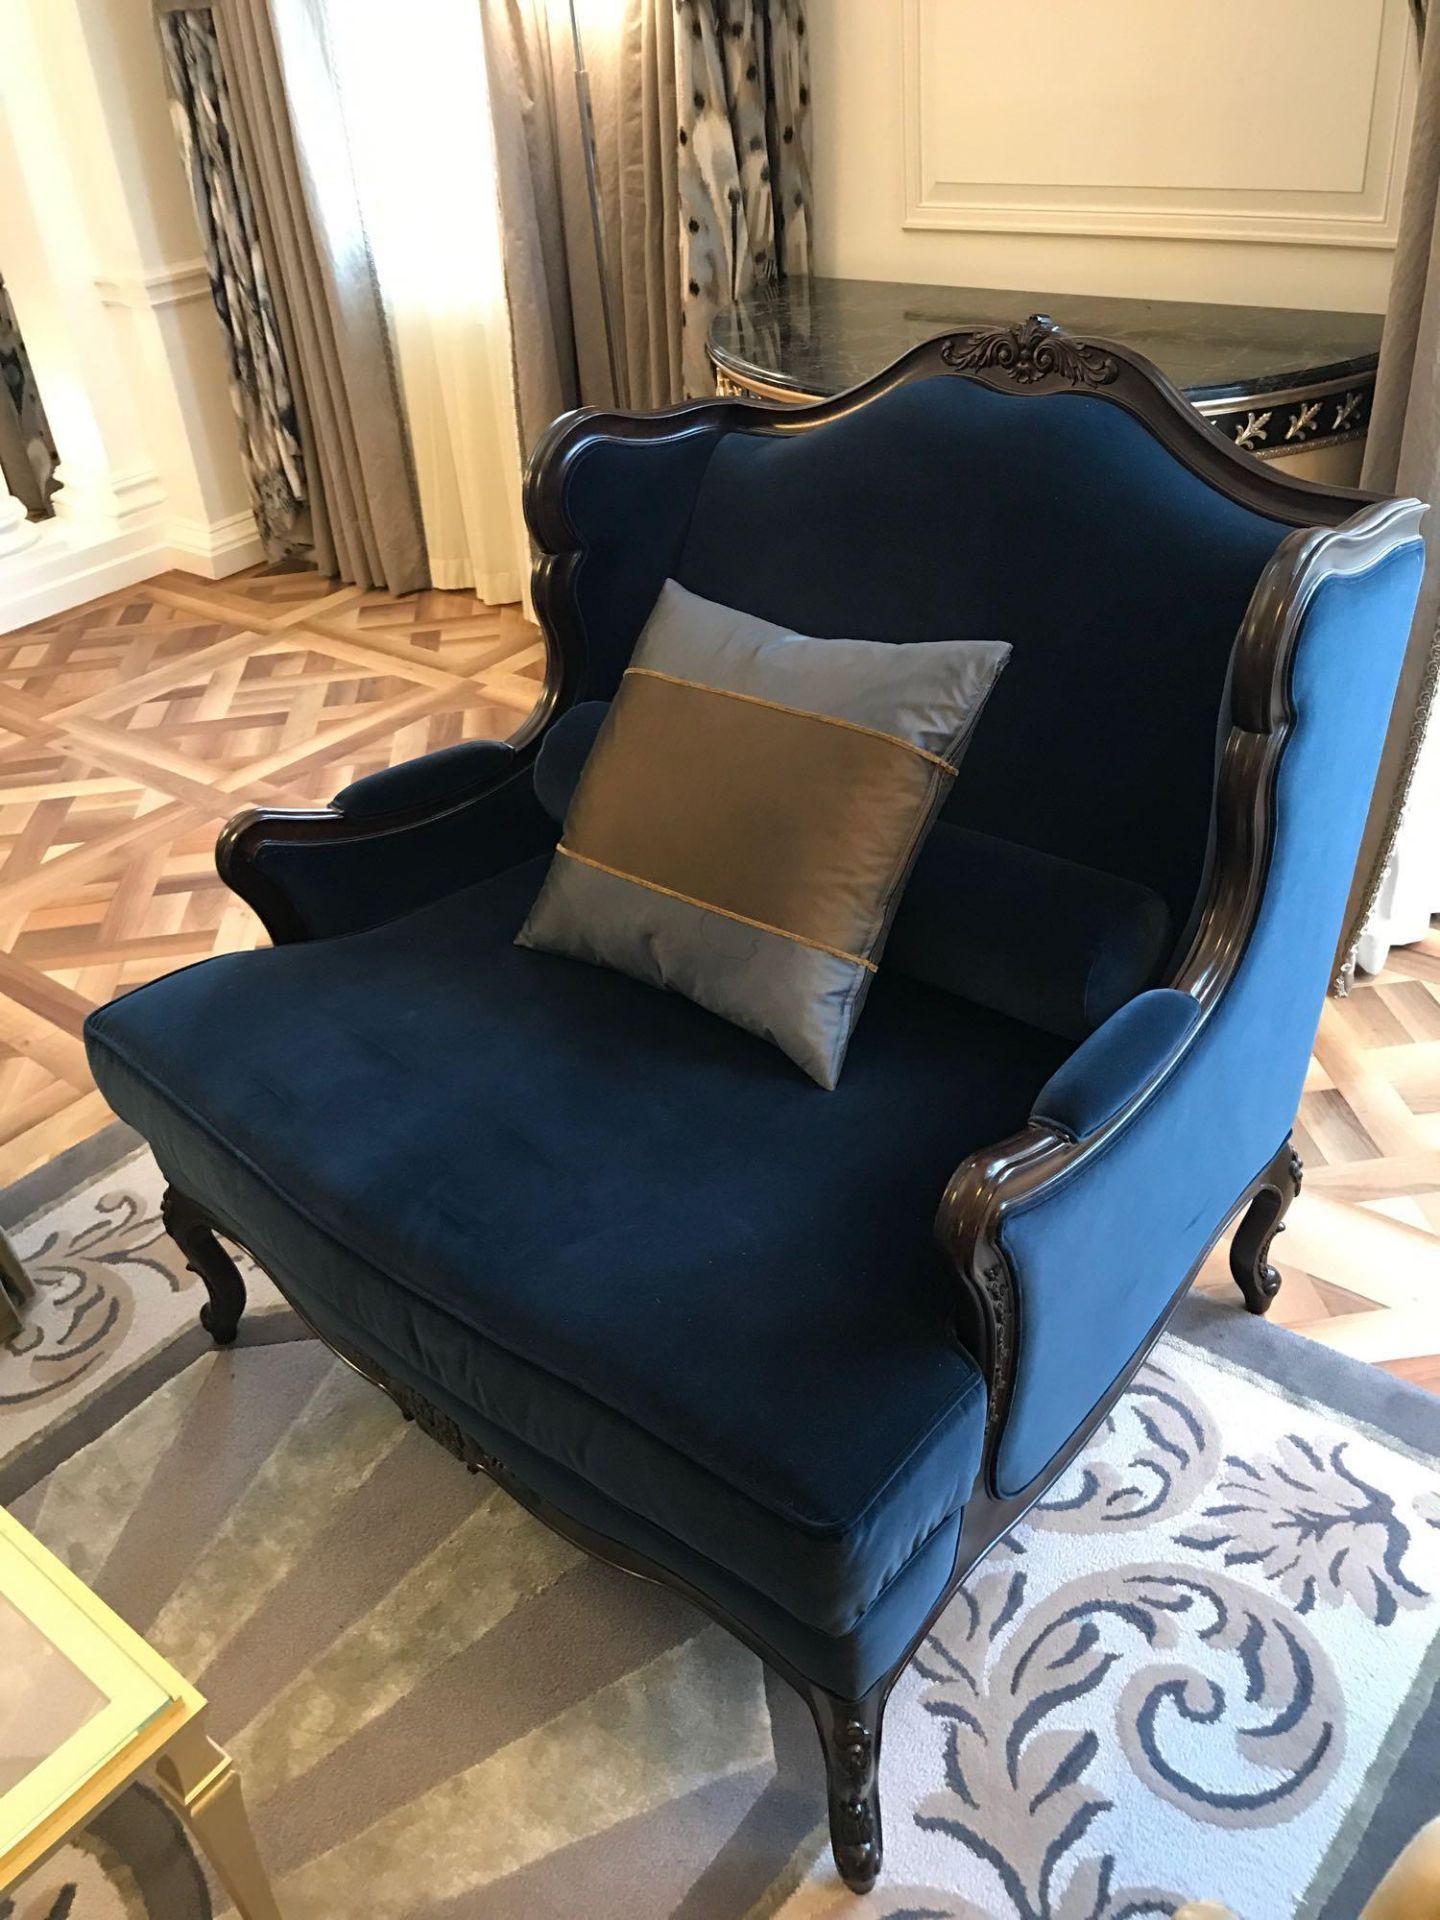 Louis XV Style Loveseat Mahogany Carved With Floral Patina And Cabriole Legs Blue Upholstered 100 - Bild 2 aus 2